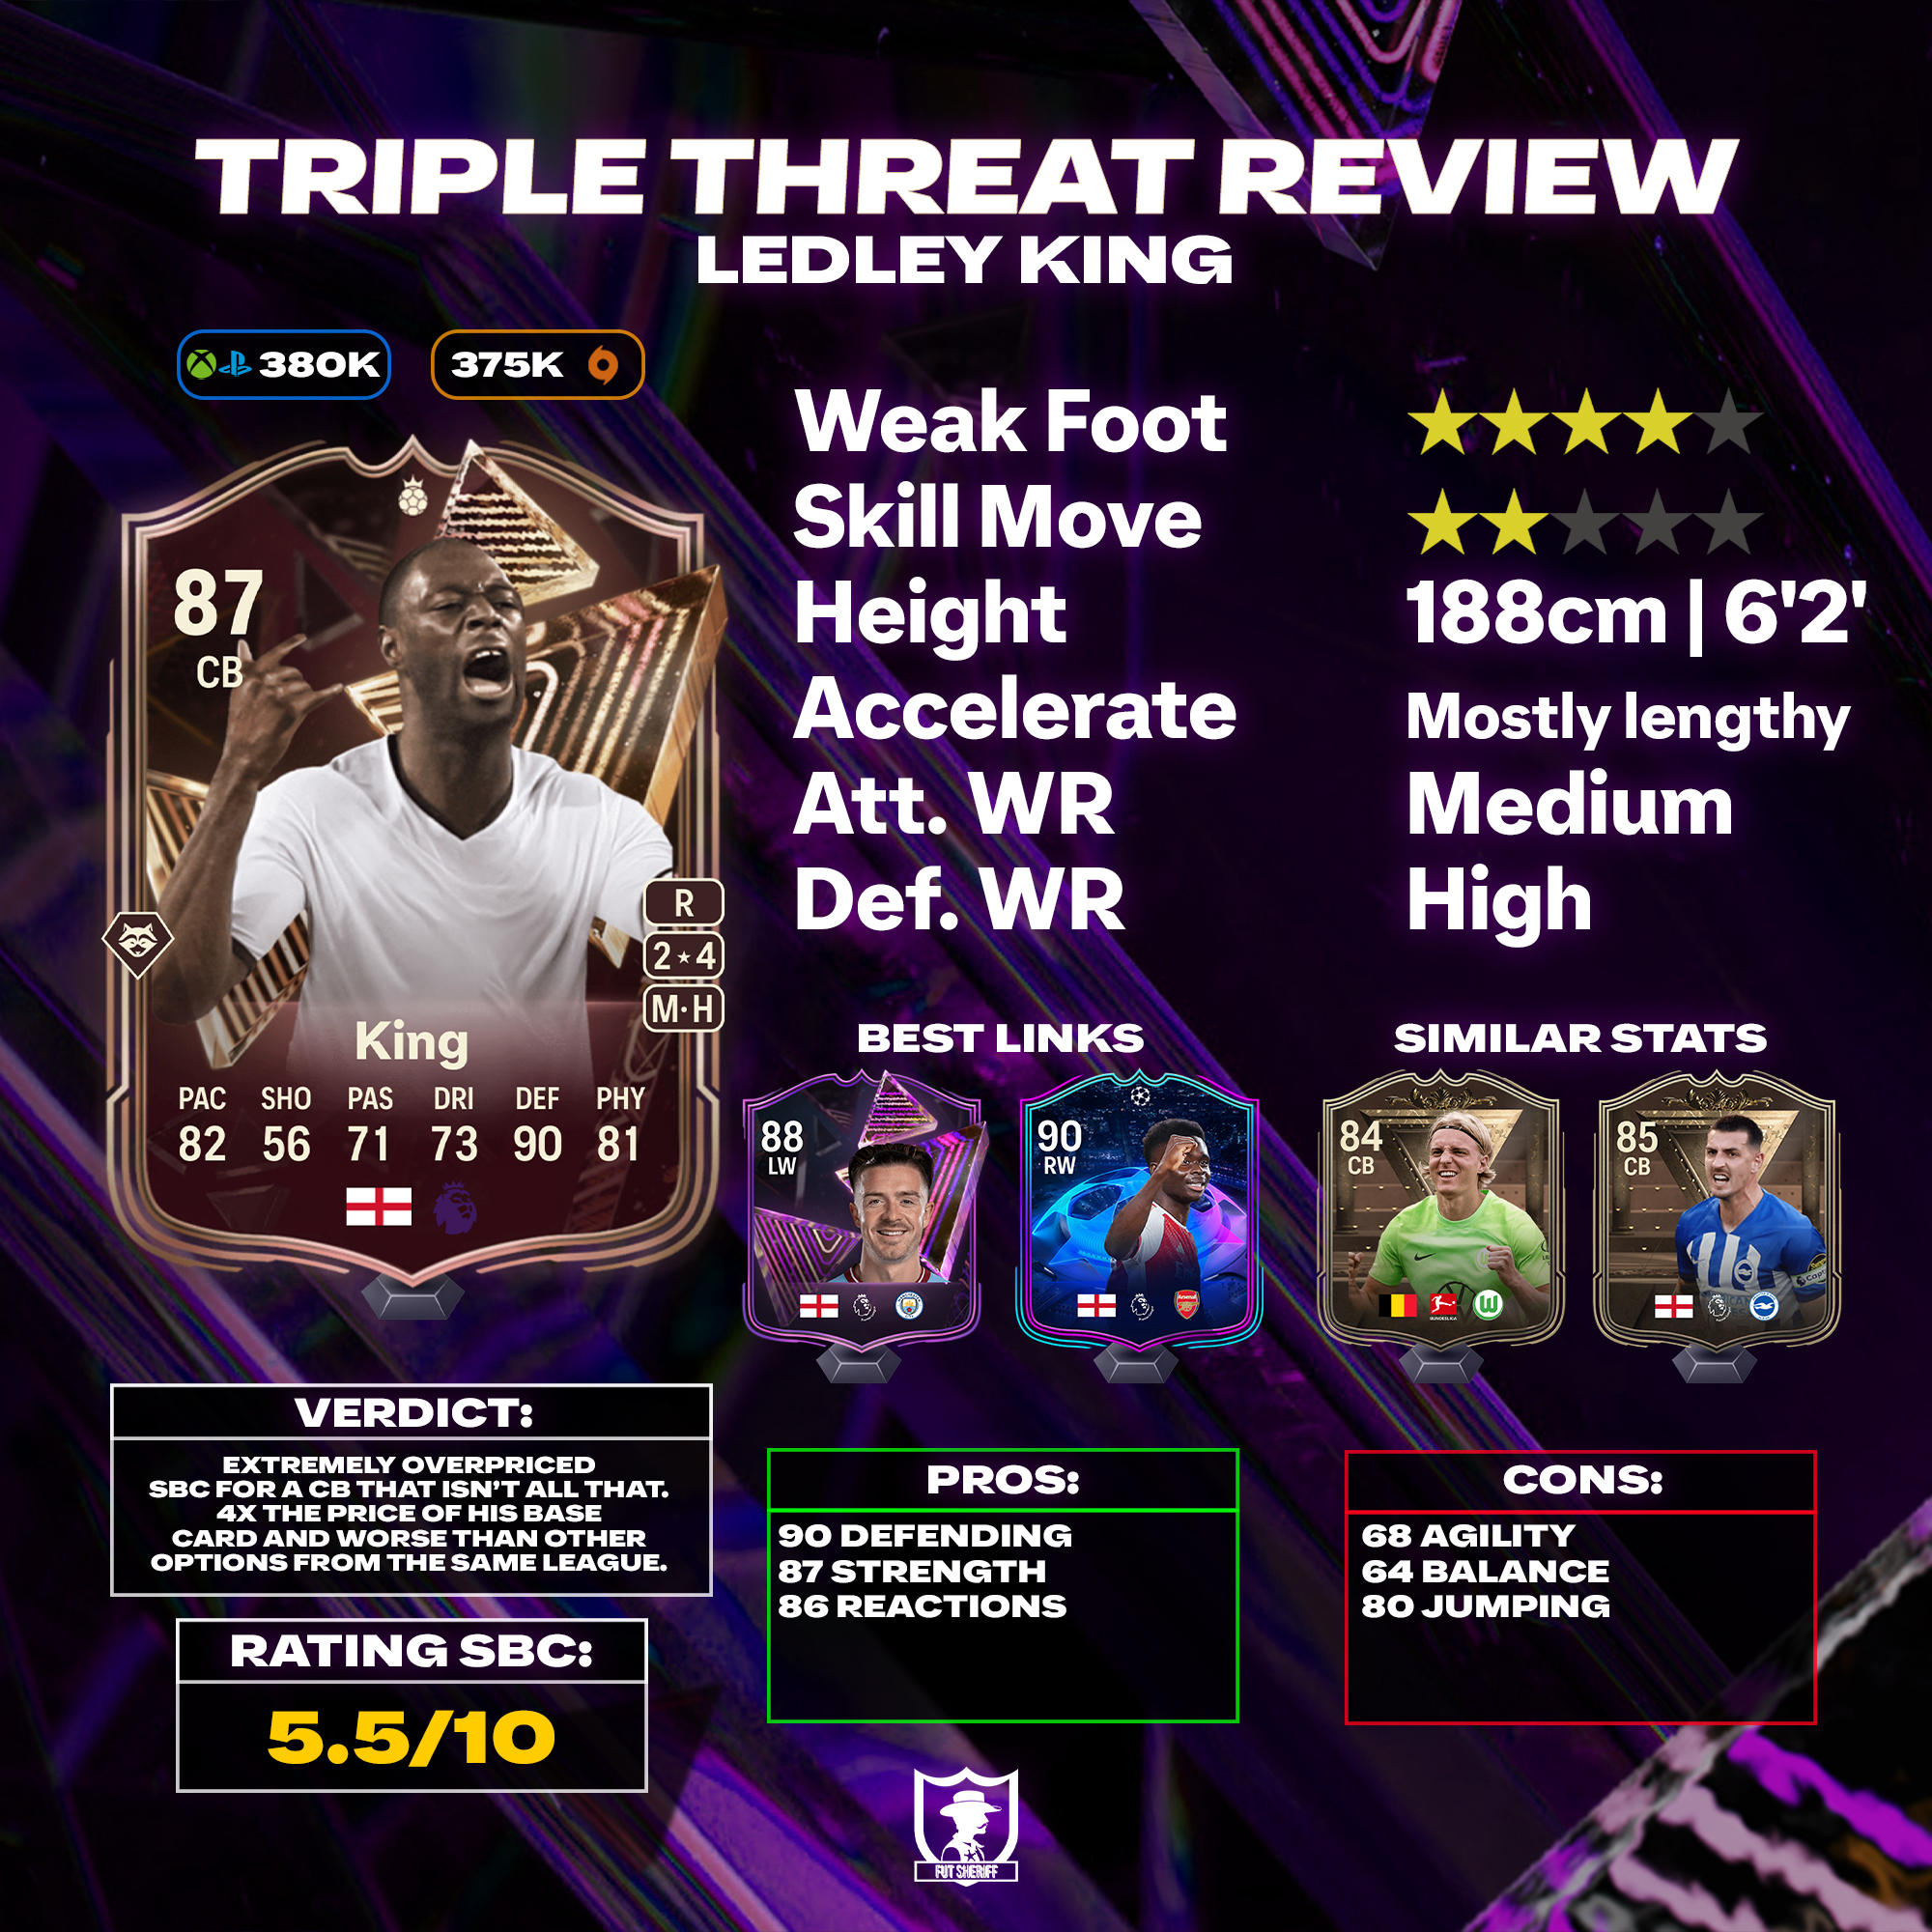 Fut Sheriff on X: 🚨Gouiri is coming via Academy Player Objective soon!  Another french during future stars promo👀🔥 ✓Stats and OVR predicted!  Design via @Criminal__x 🔥 #leak #fifa22  / X